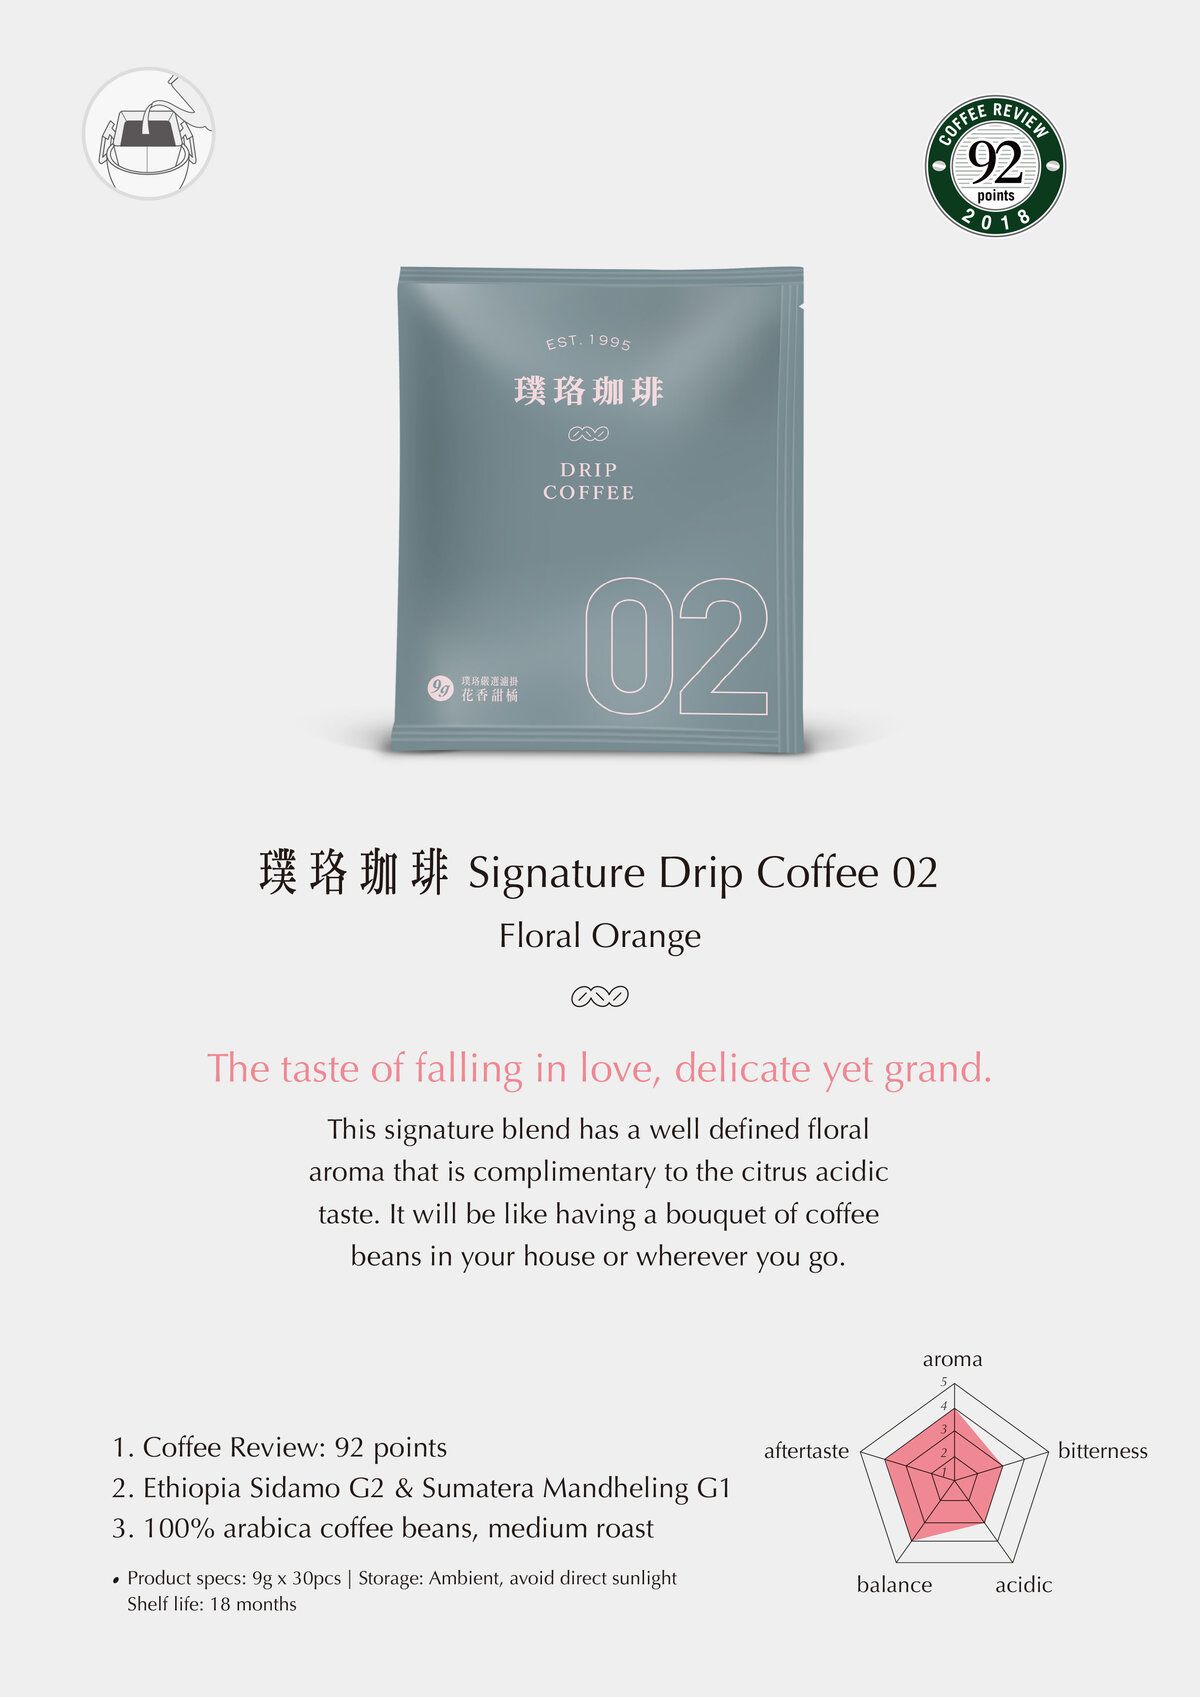 more information about drip coffee signature 02